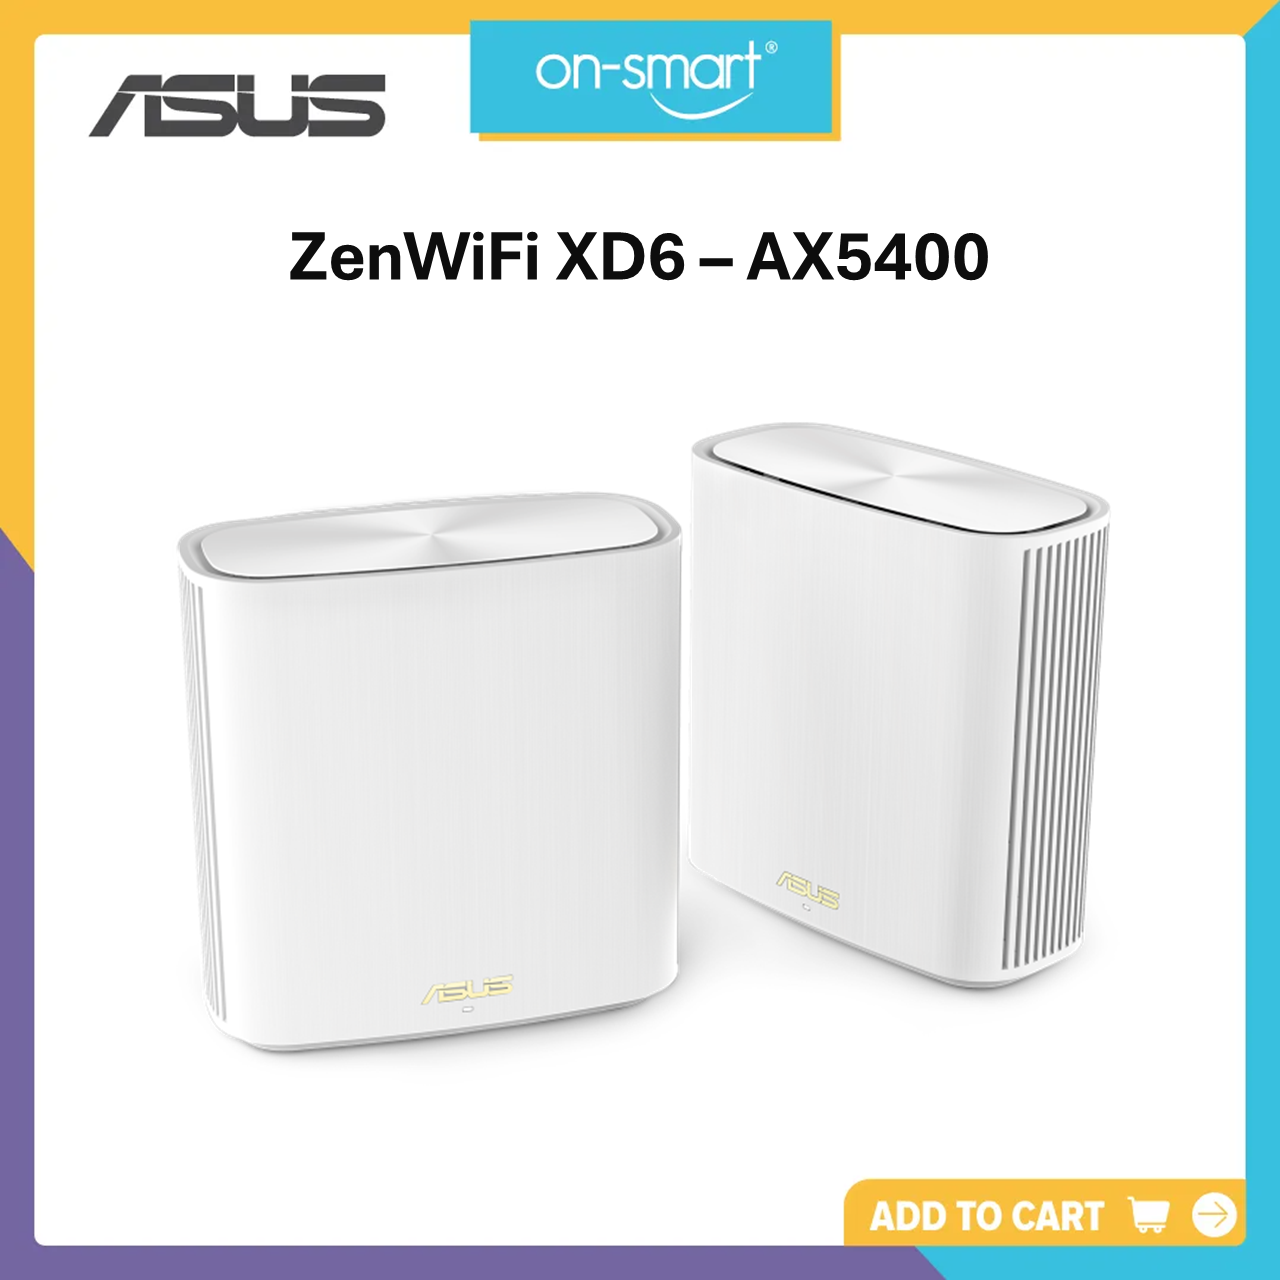 Asus ZenWifi XD6 - AX5400 WiFi 6 Routers White (2-Pack)